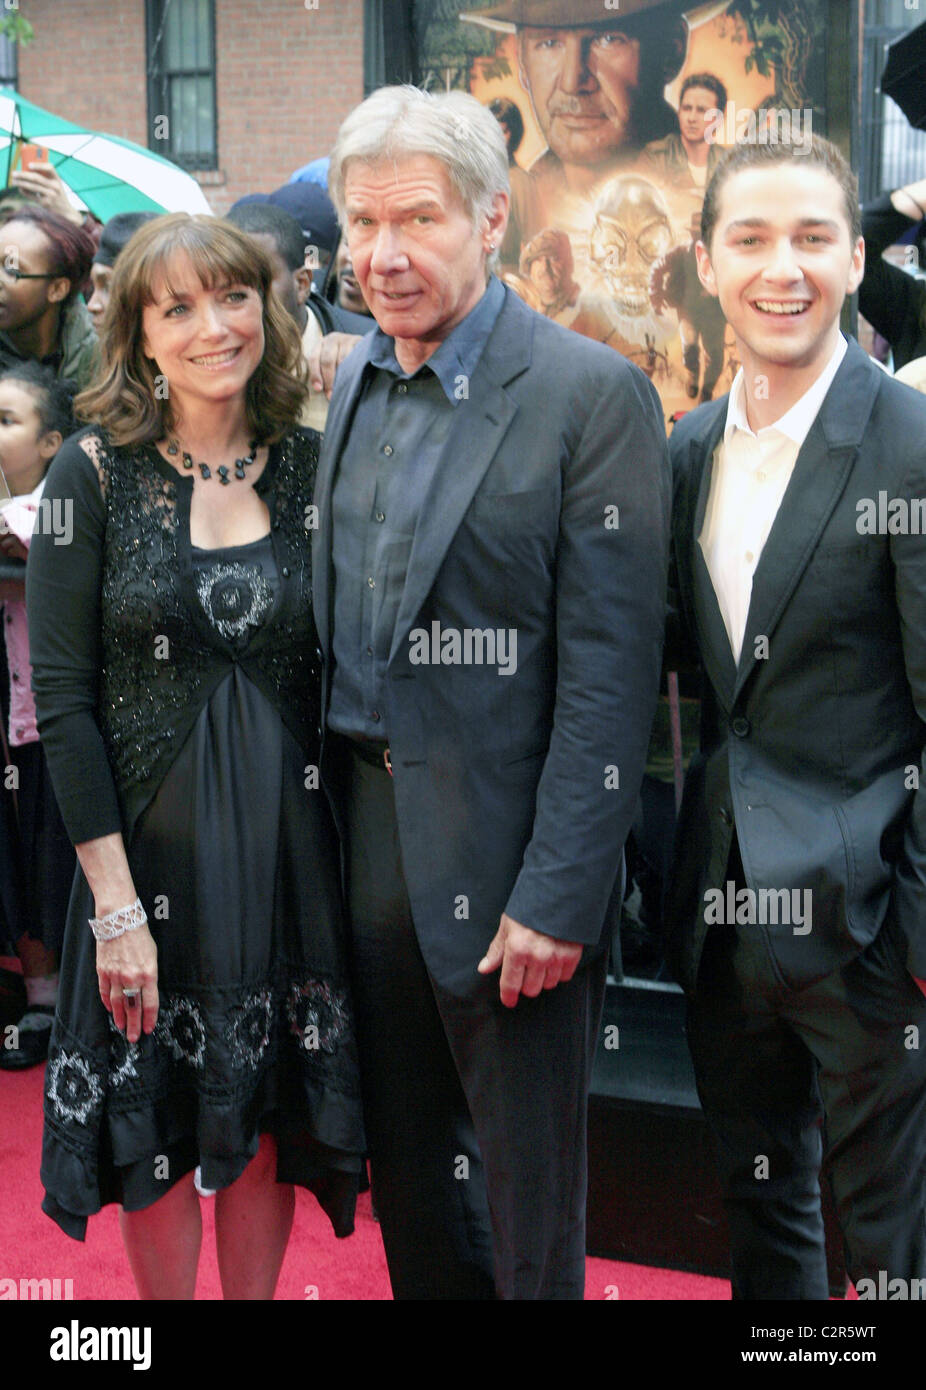 Karen Allen, Harrison Ford and Shia LaBeouf New York premiere of 'Indiana Jones and the Kingdom of the Crystal Skull' at AMC Stock Photo